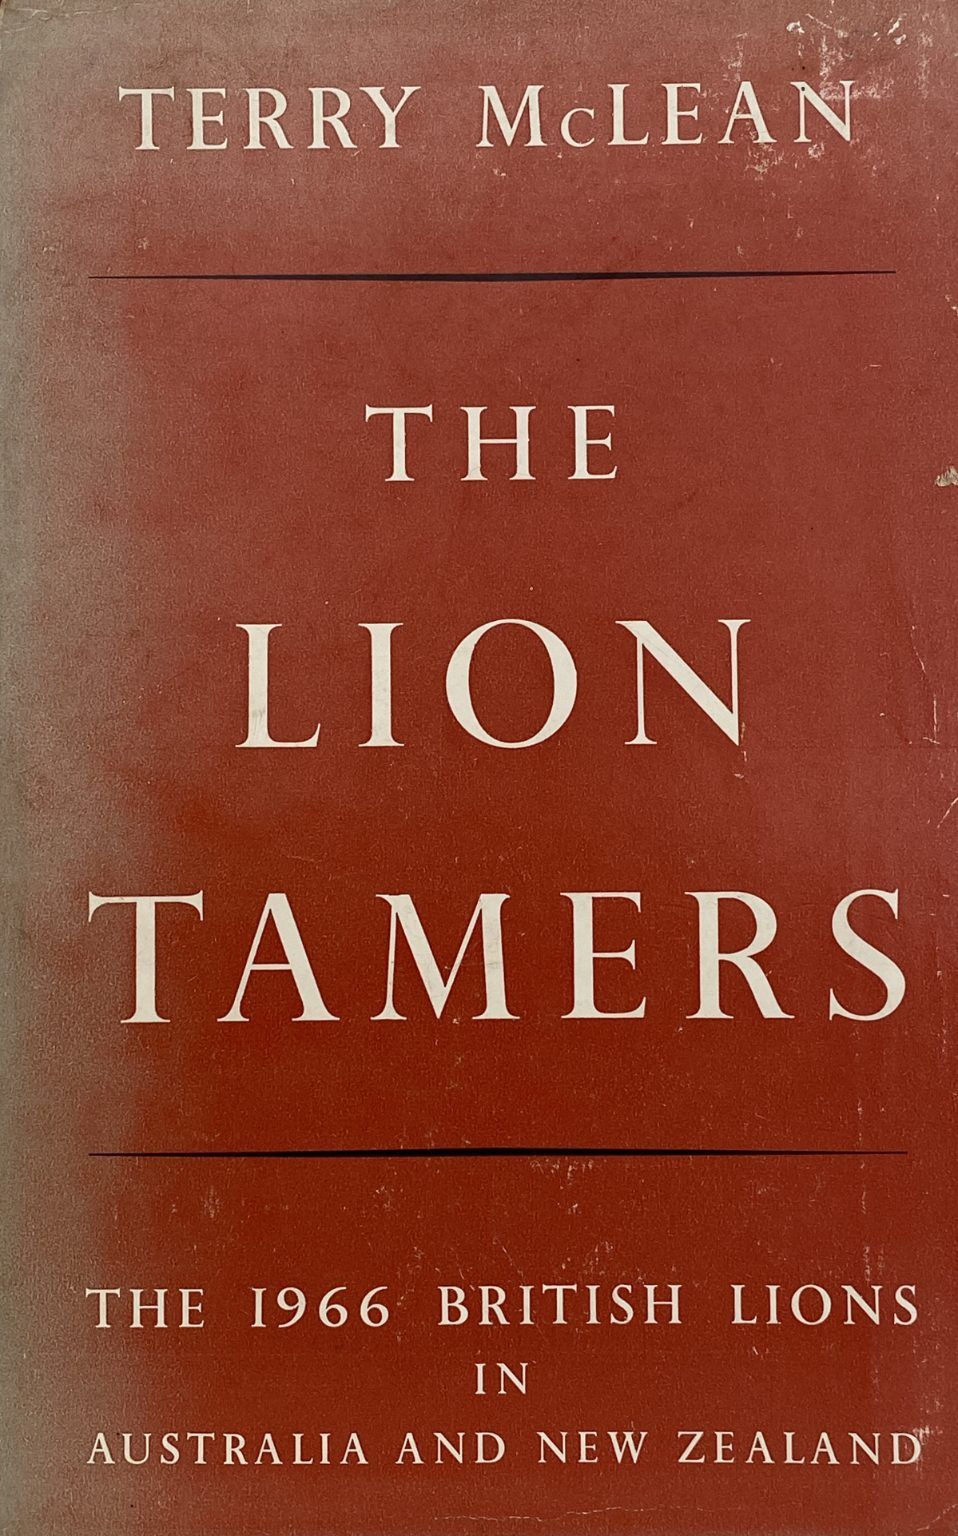 THE LION TAMERS: The 1966 British Lions in Australia and New Zealand